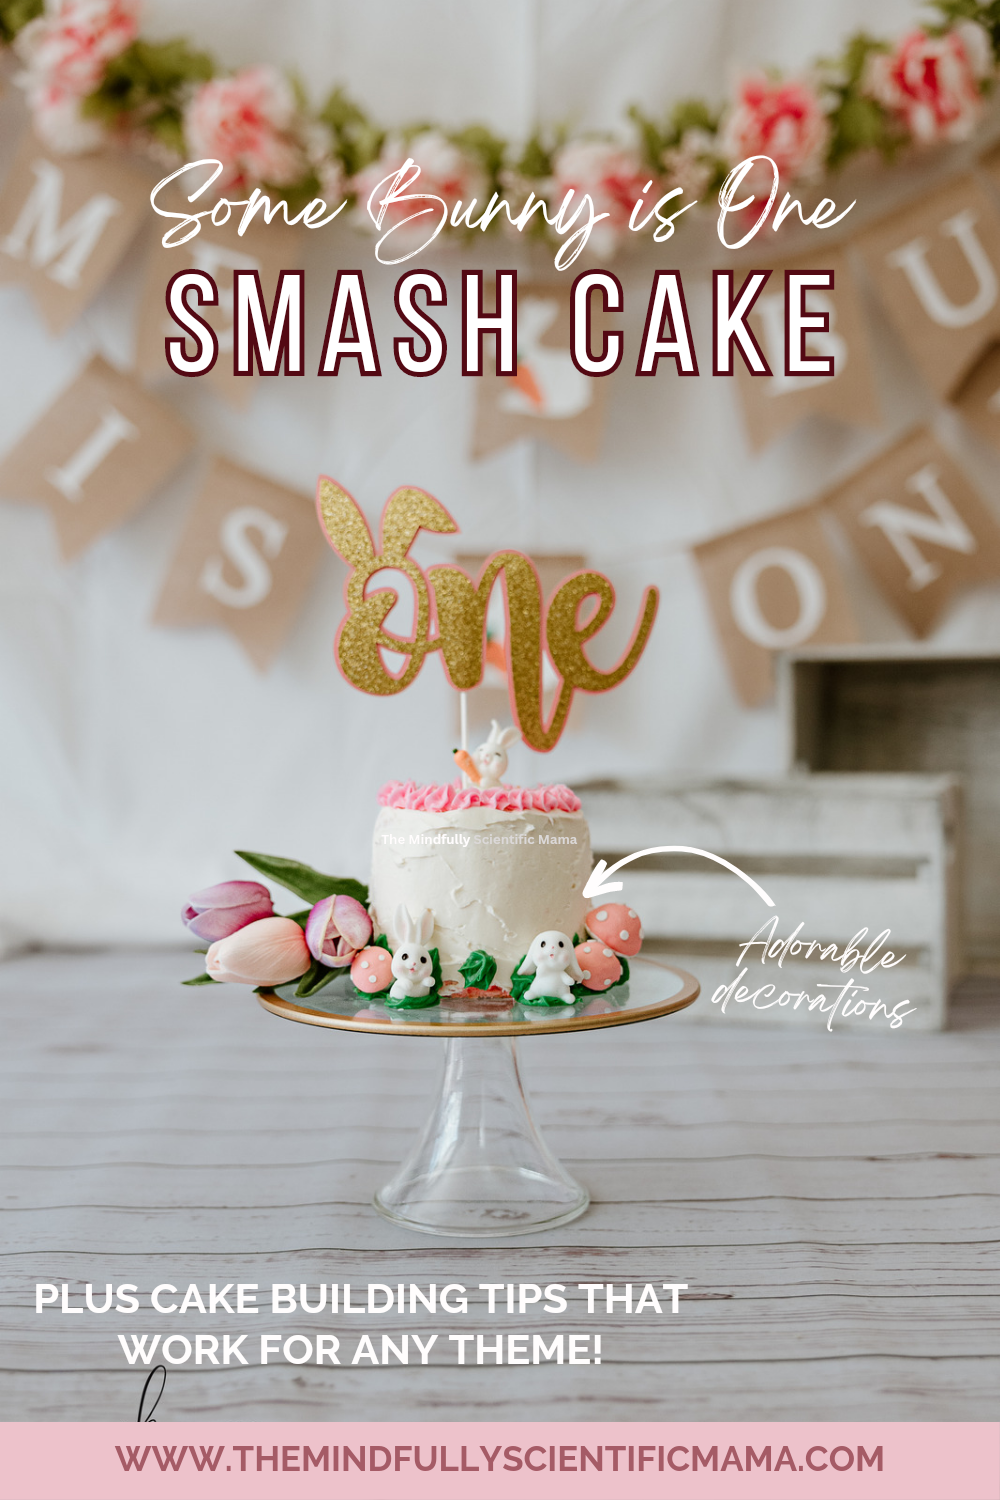 This image is for Pinterest. It depicts the white smash cake with bunny and flower decorations against the white, floral, and banner backdrop and the white floor. The text reads 